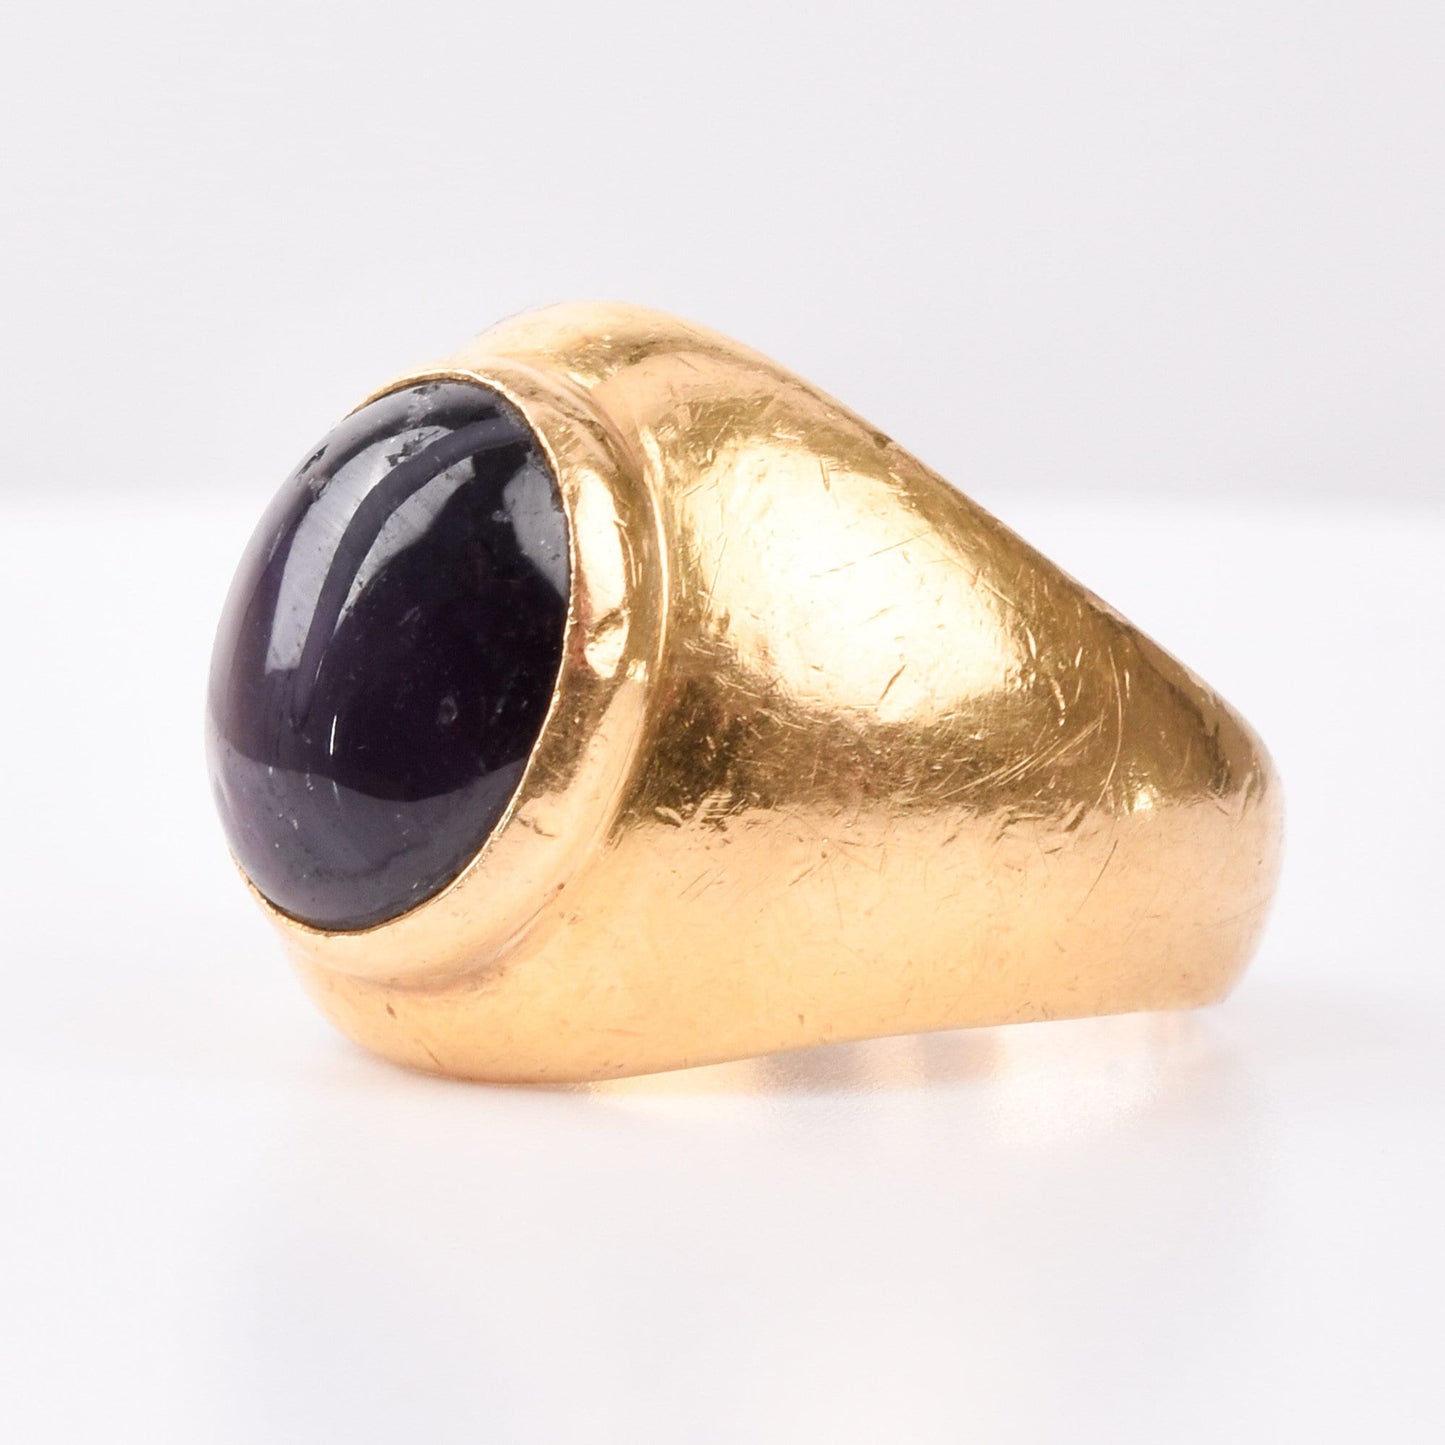 Black Star Sapphire Ring In 18K Yellow Gold, Solid Gold Cab Ring, Estate Jewelry, Size 5 3/4 US